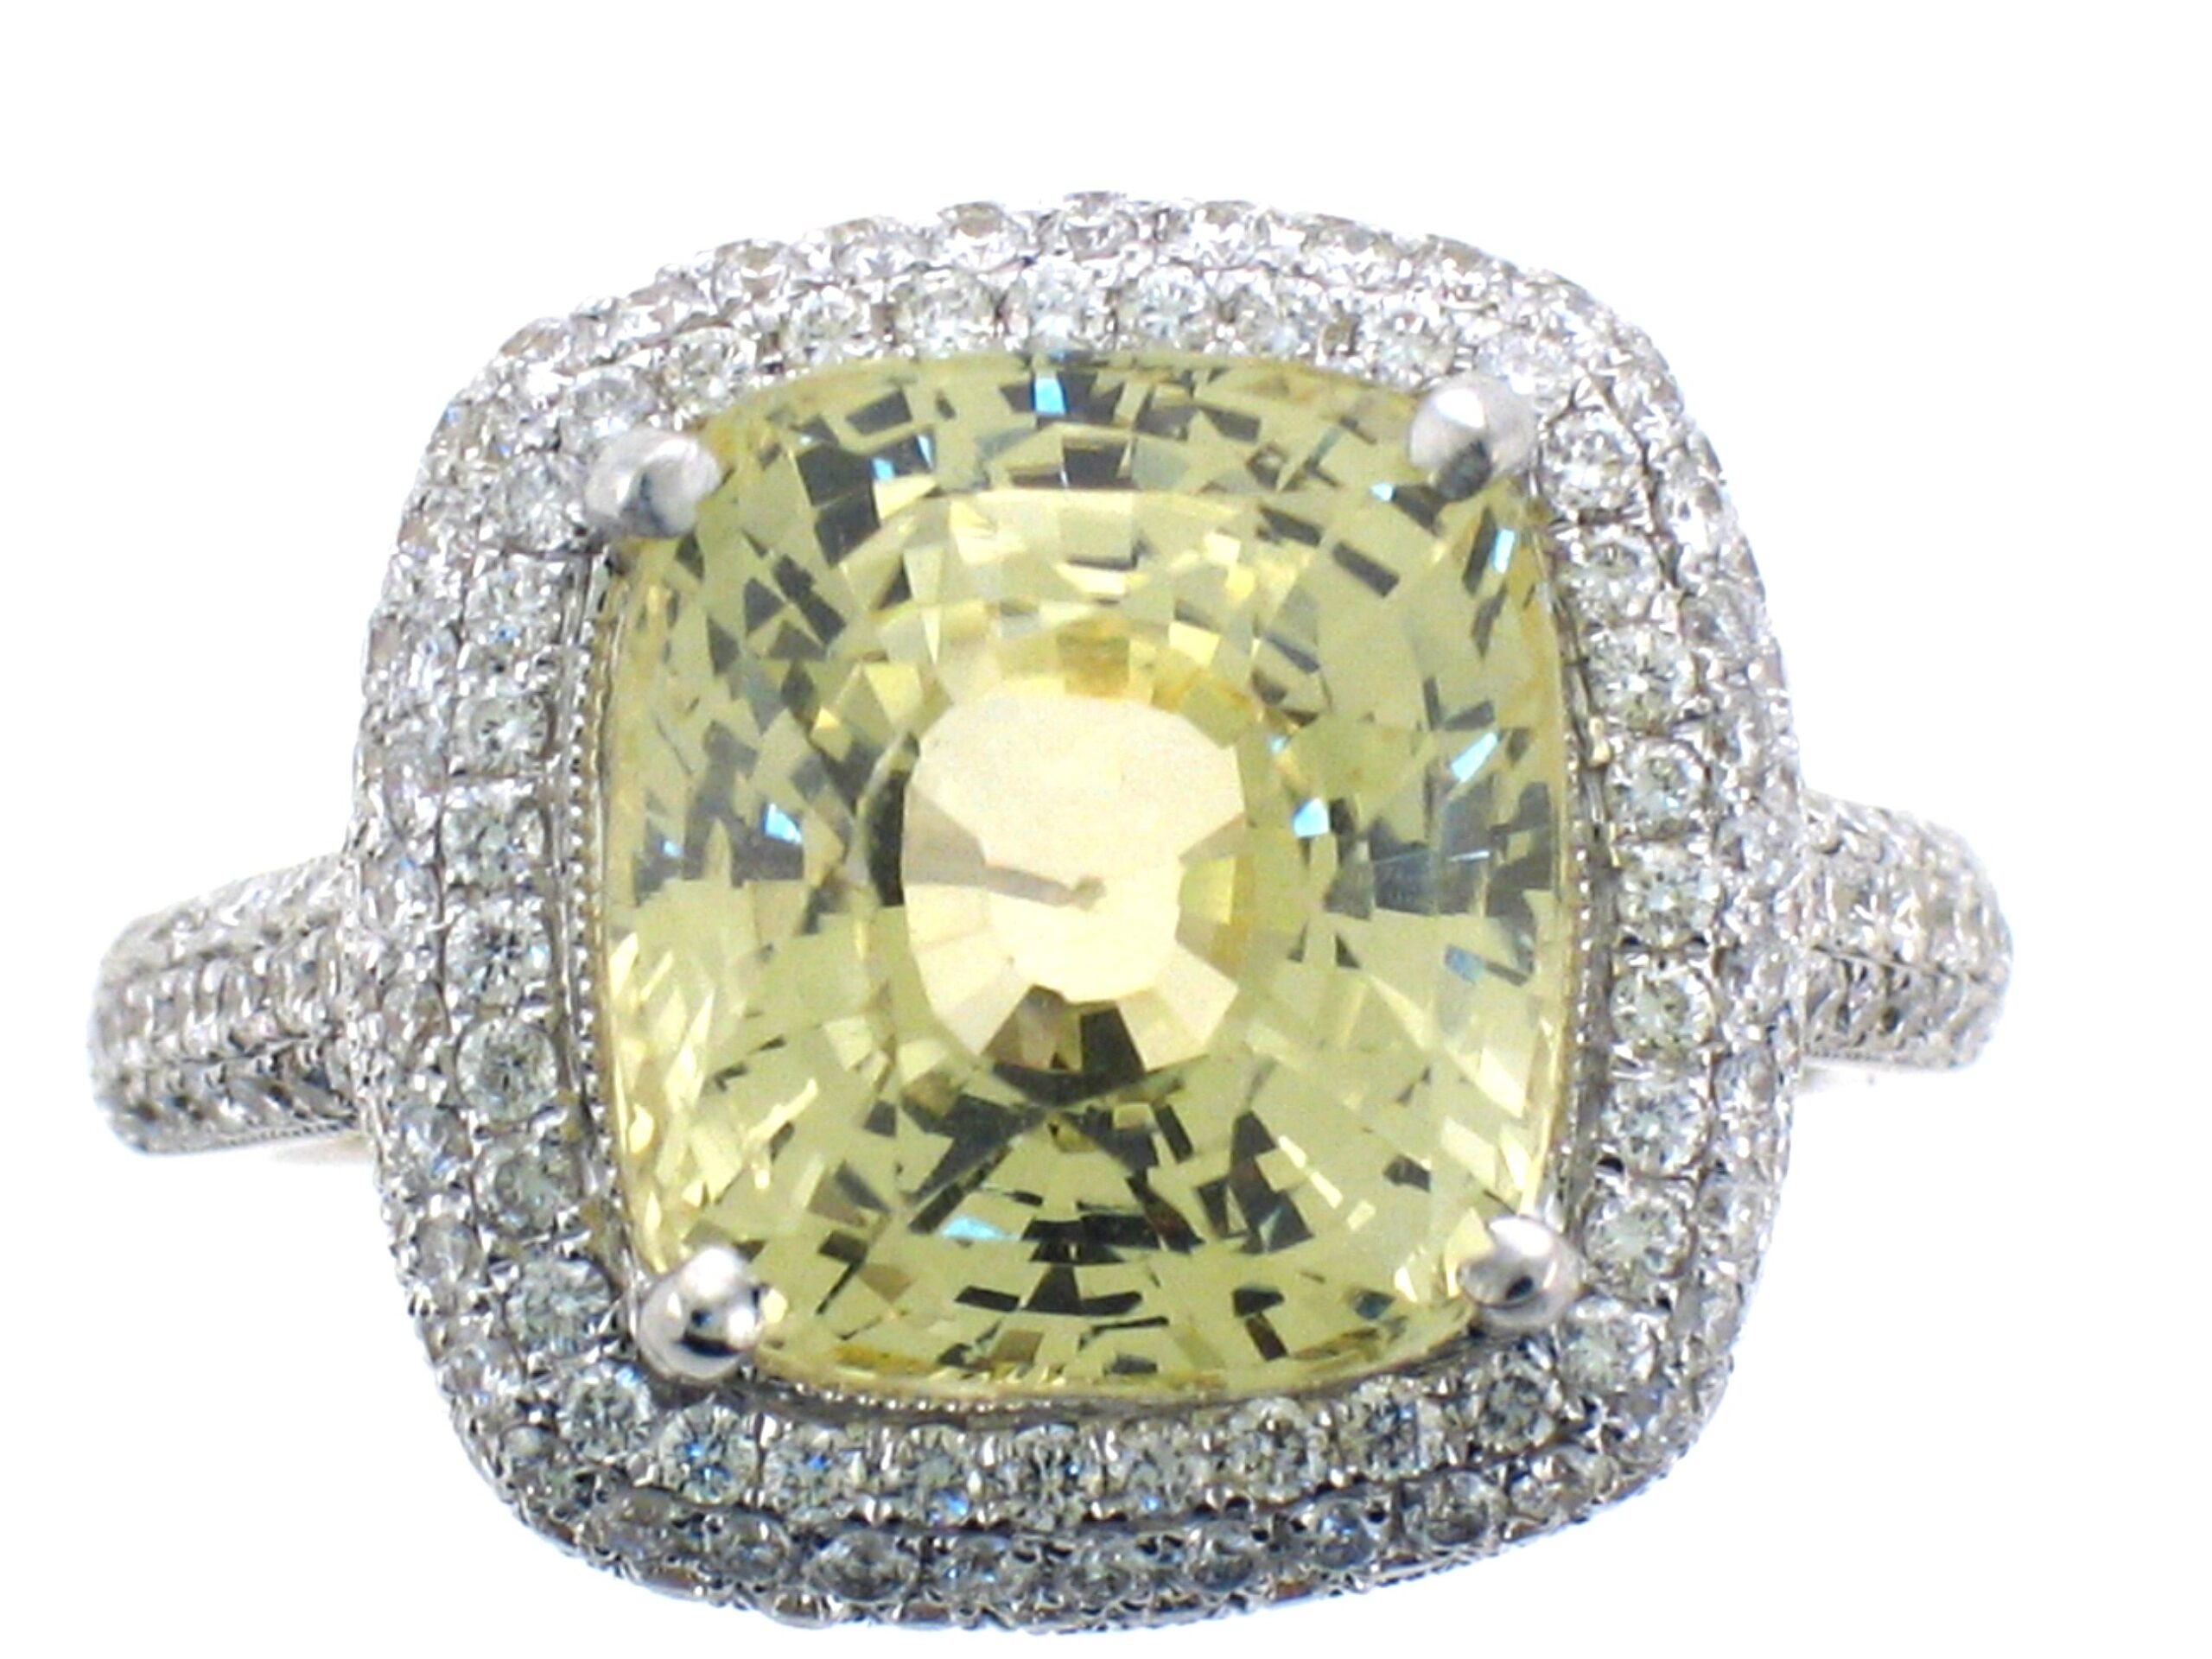 Large Radiant Cushion Cut Natural Yellow Sapphire Ring with Double Diamond  Halo set in Ornate 14k white gold mounting (SSR-5550)